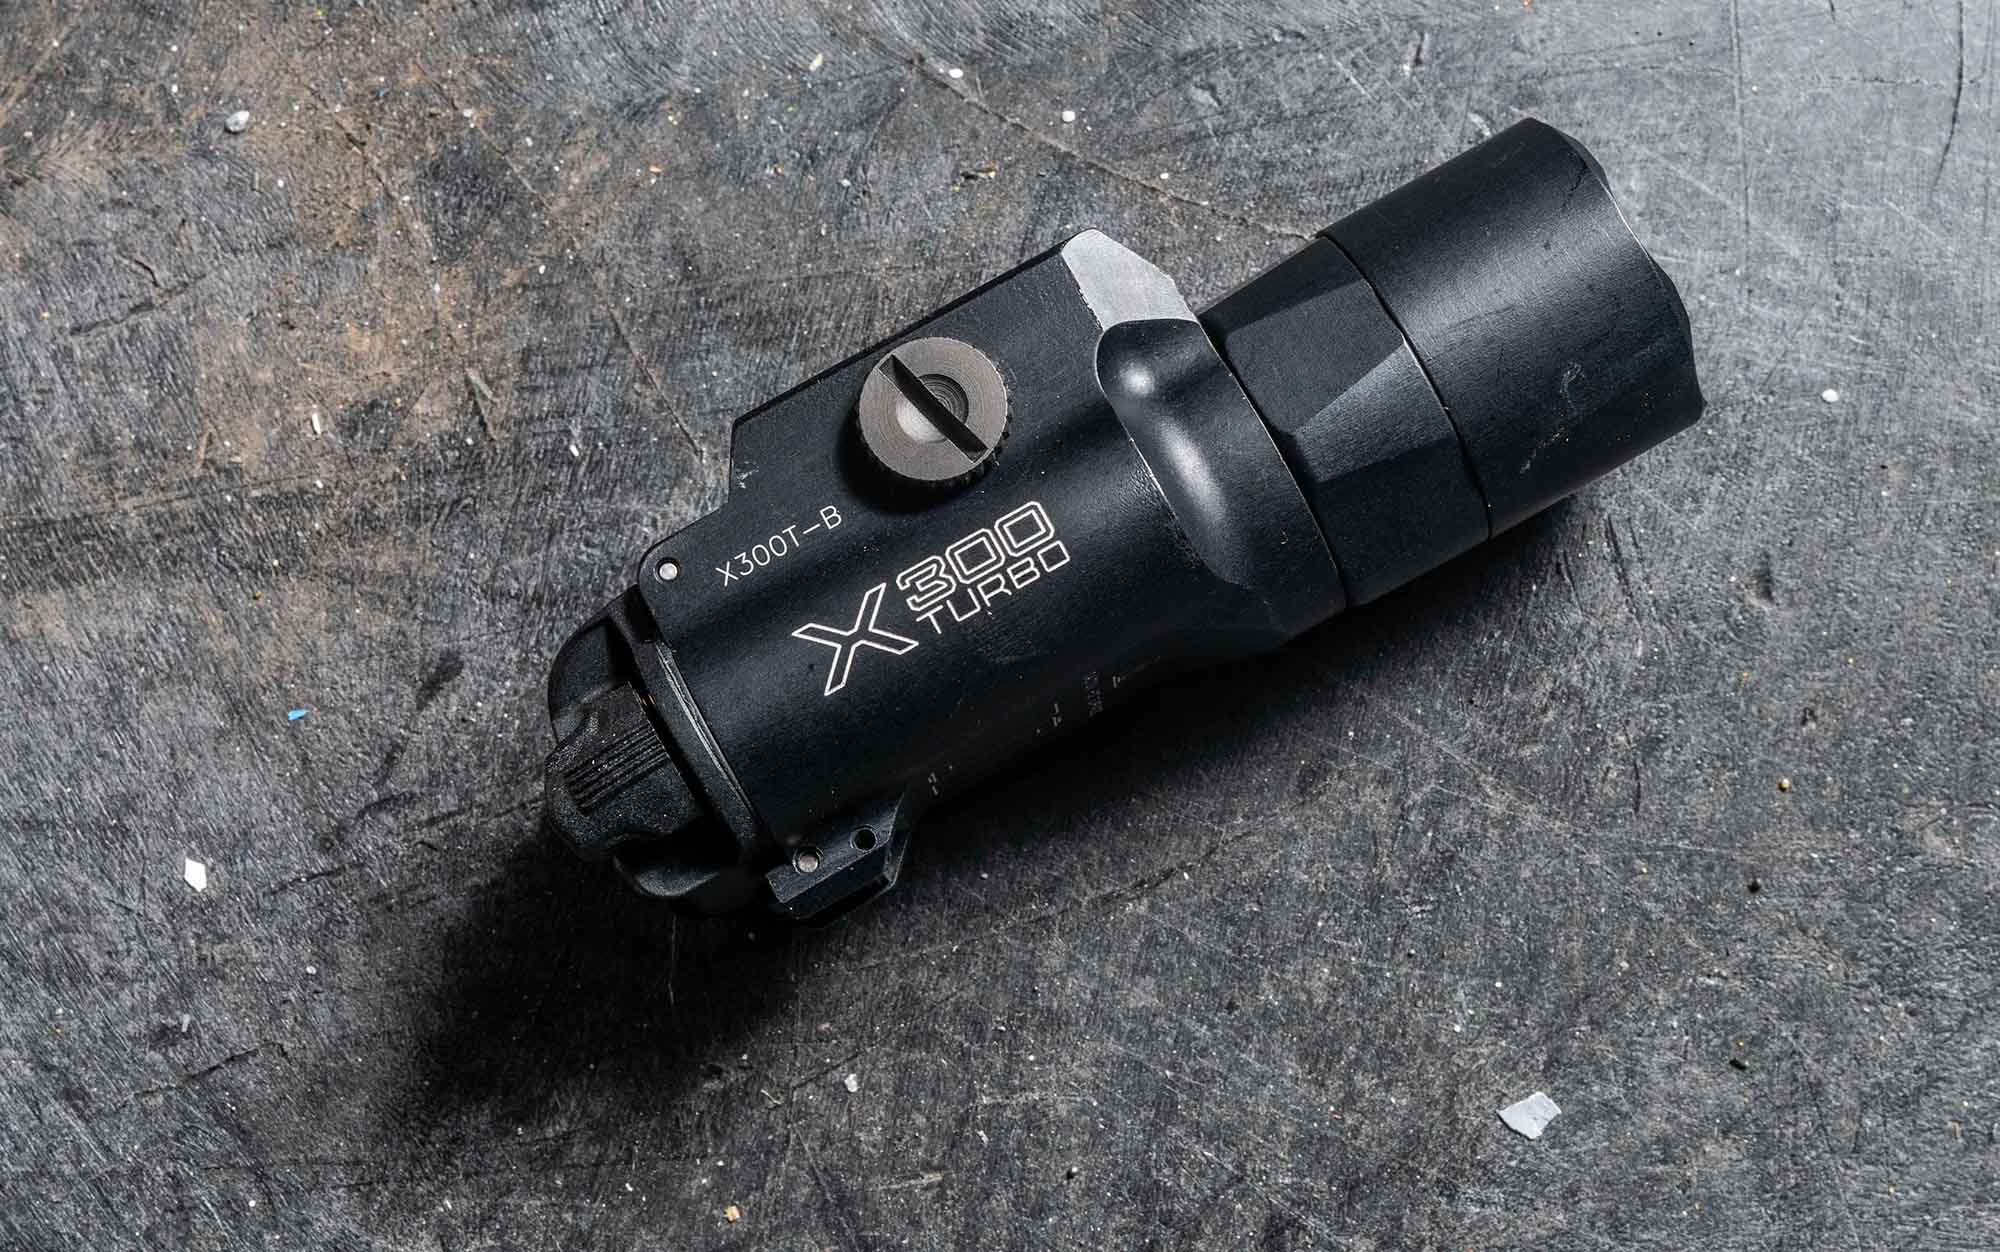 We tested the SureFire X300T.